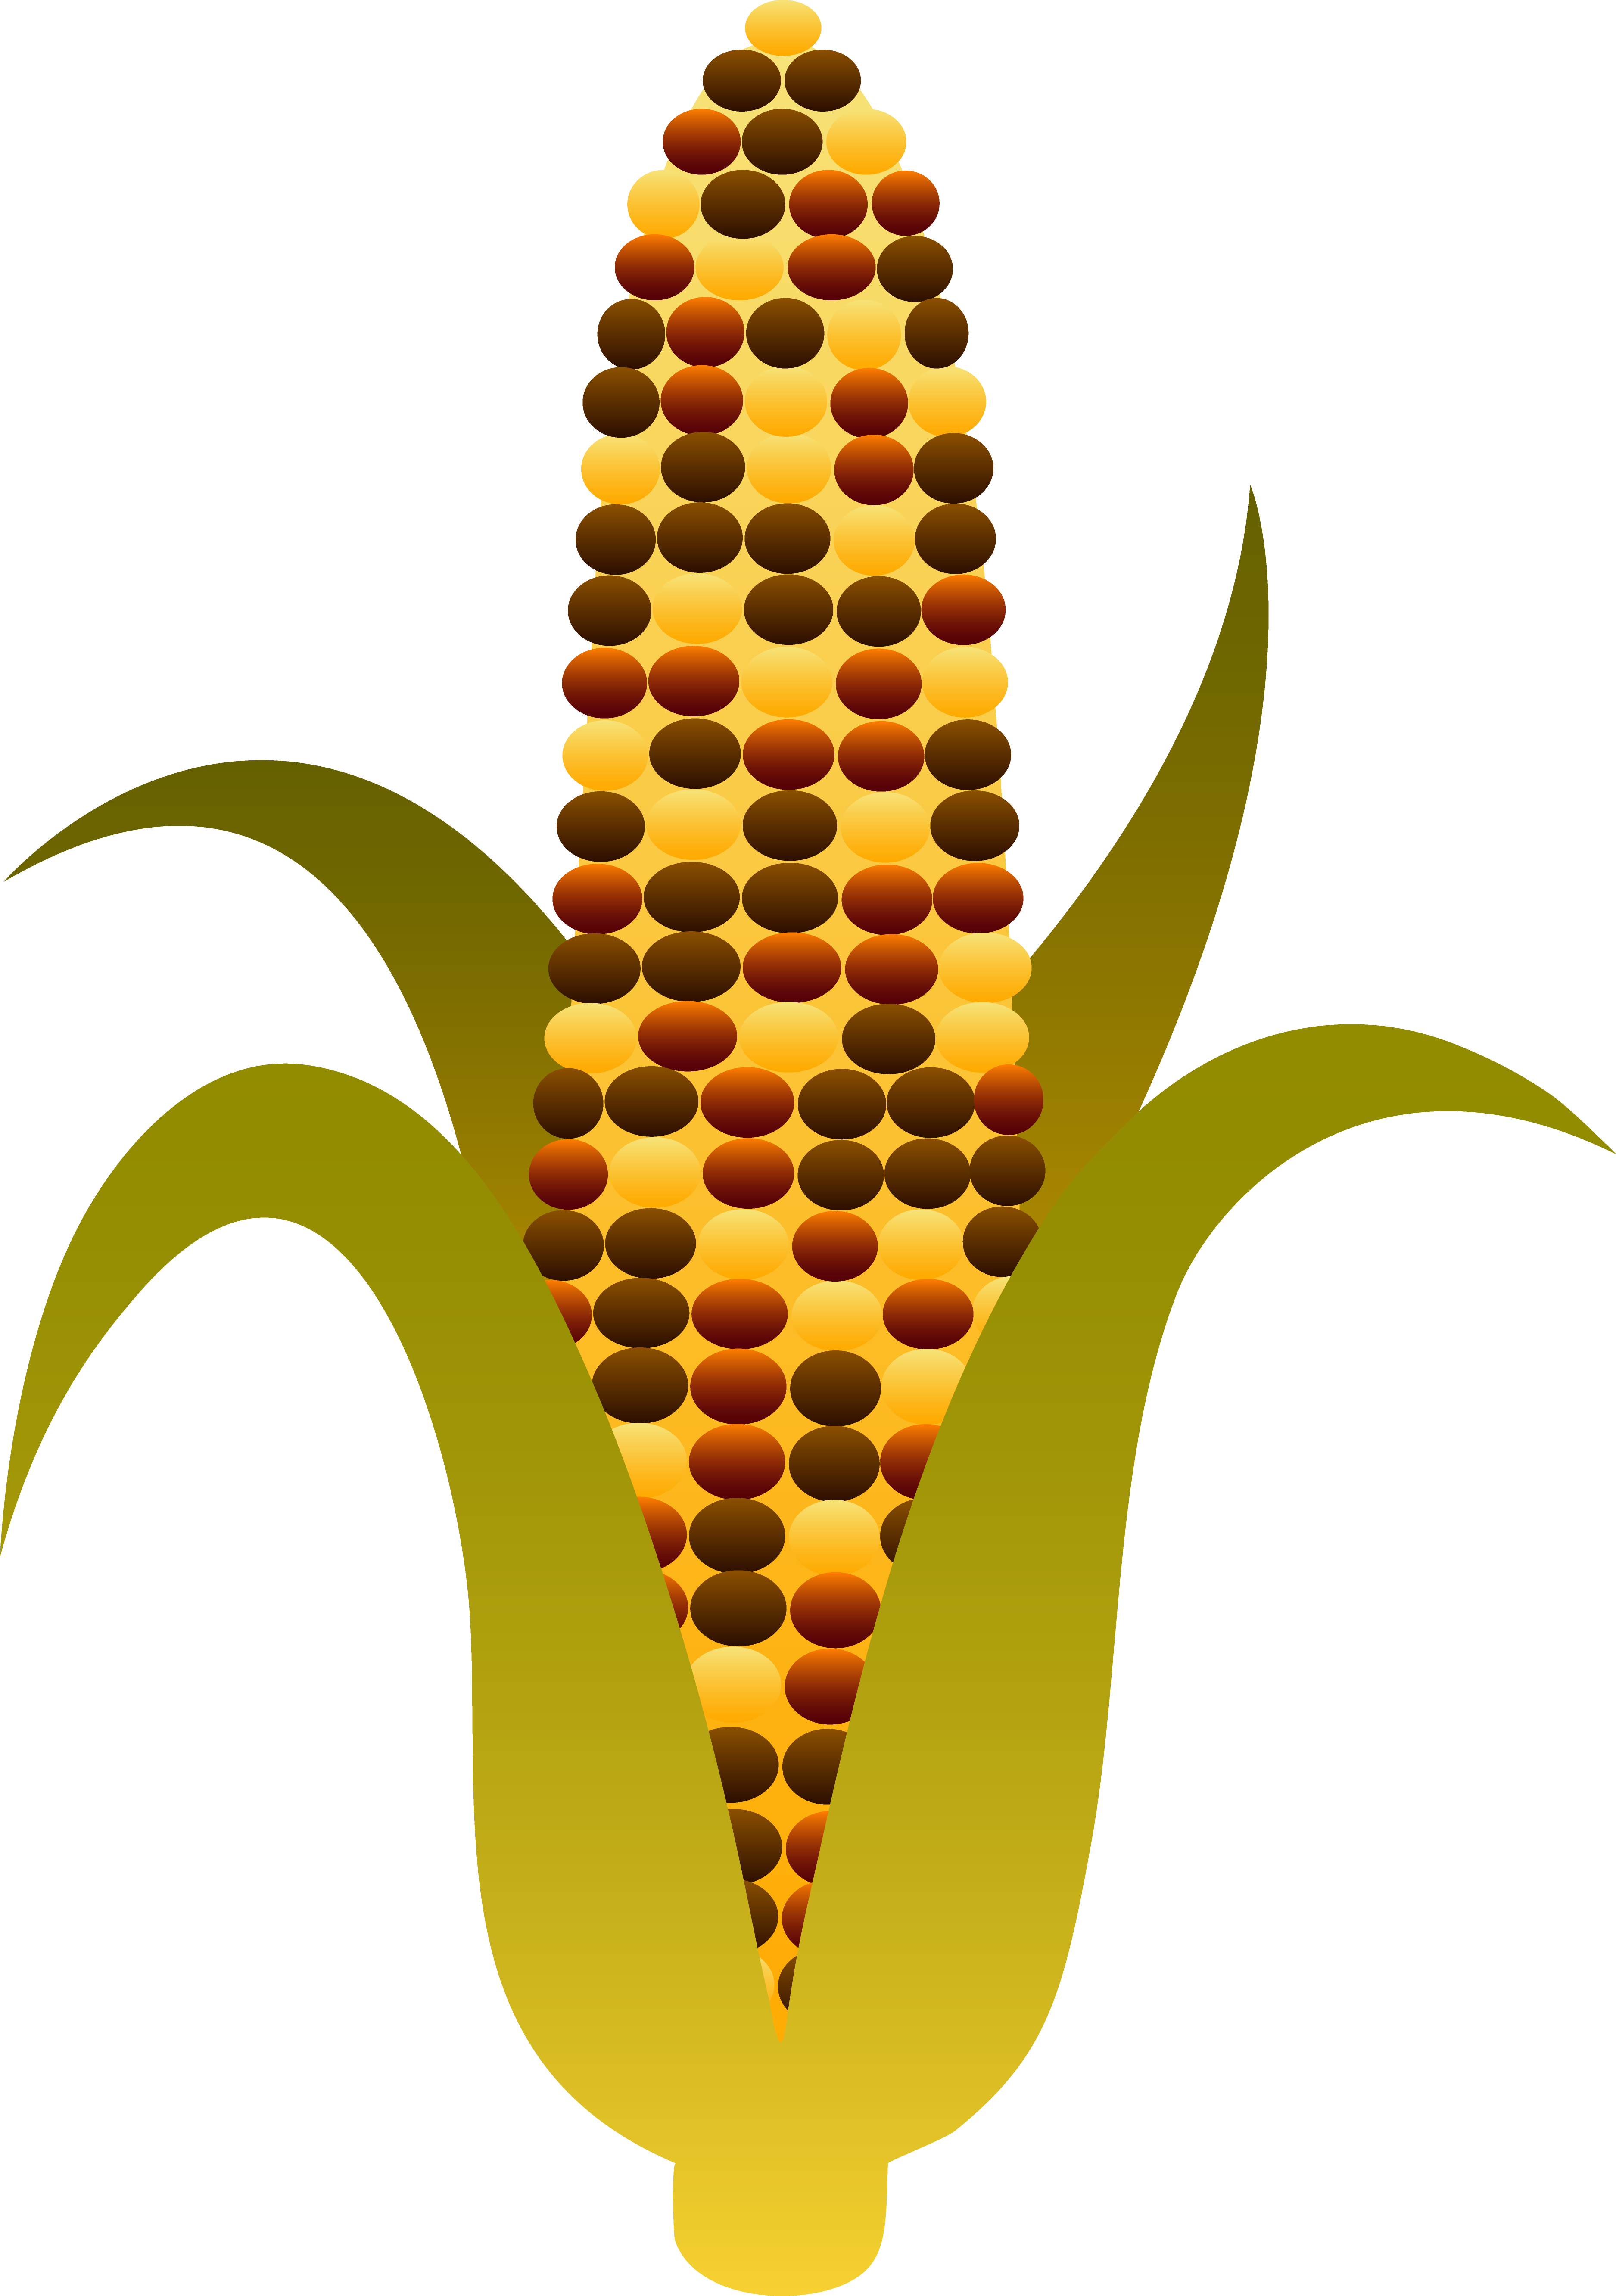 Indian harvest maize free. Face clipart corn